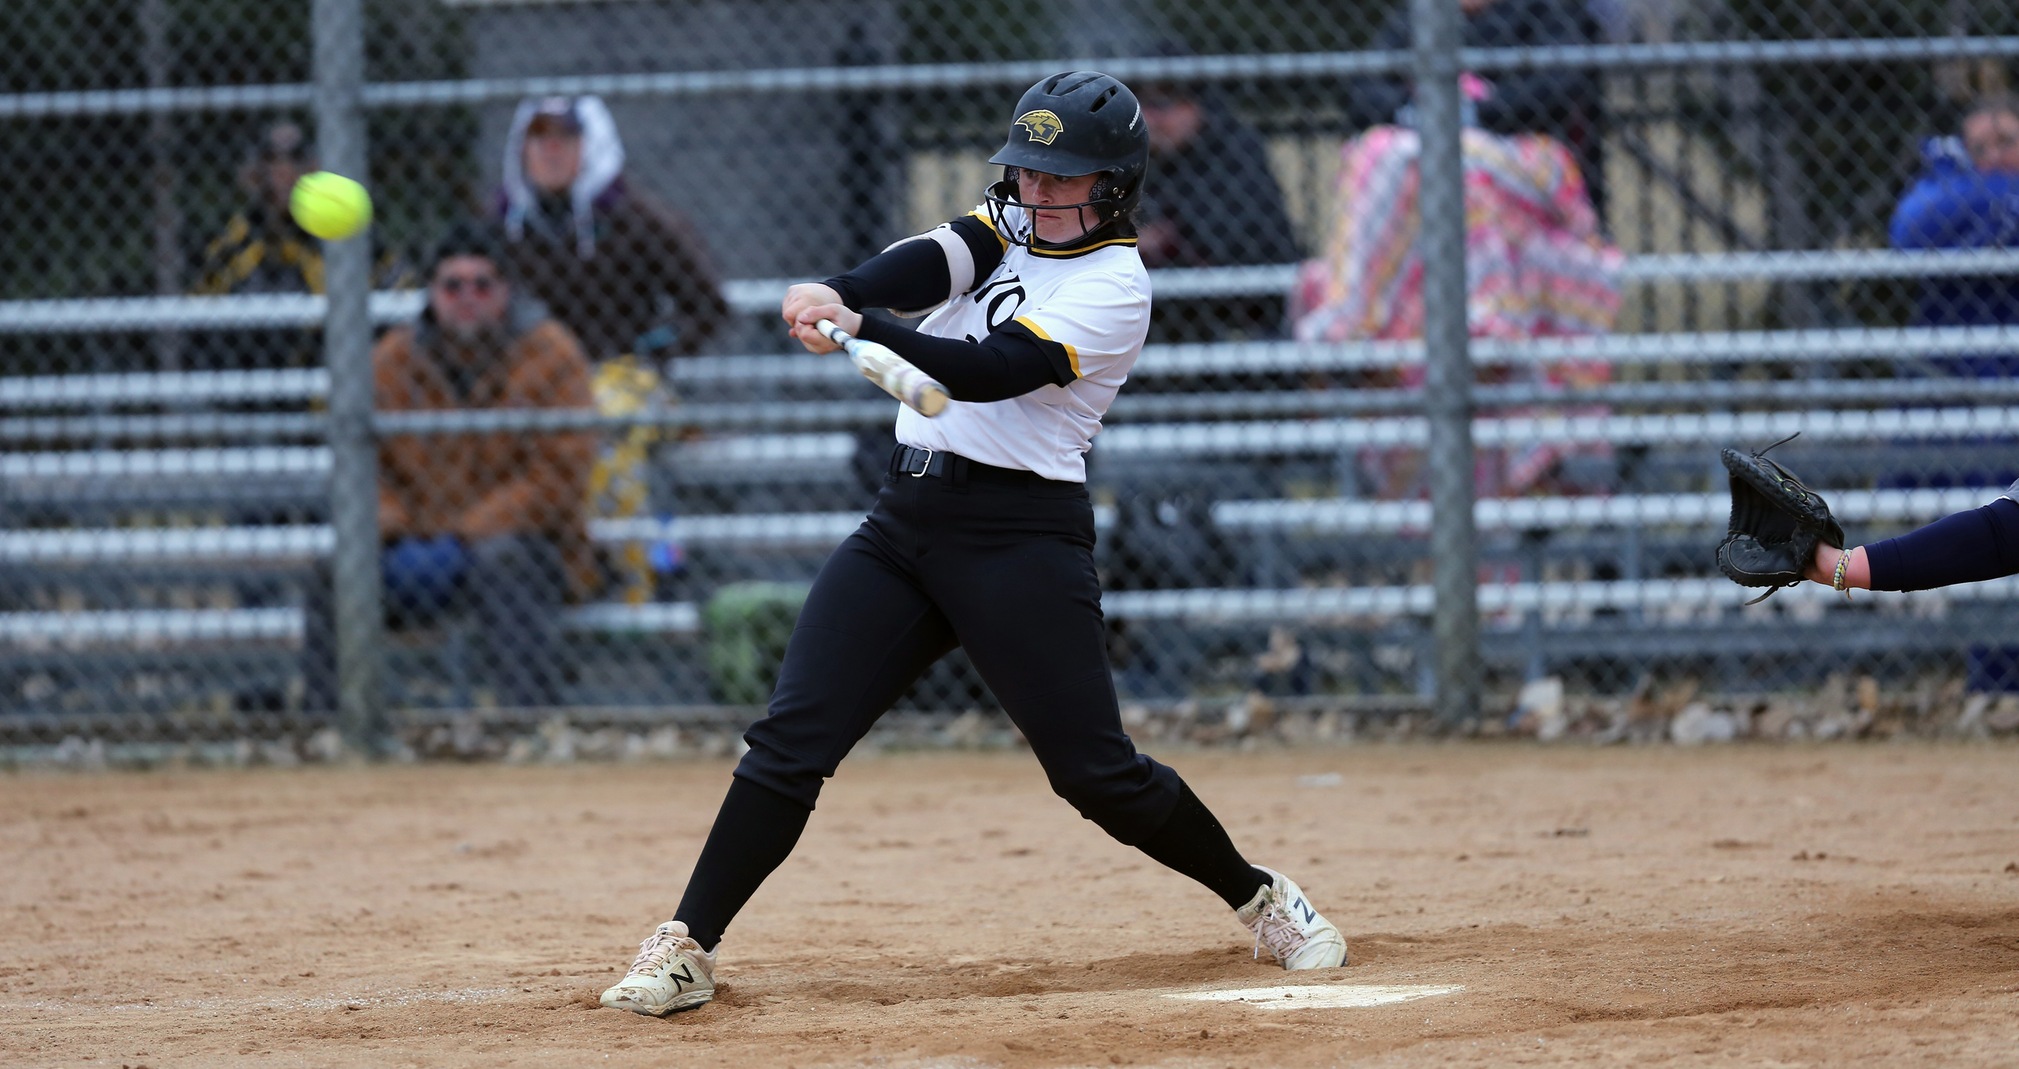 Claire Petrus had two hits and three RBIs against the Muskies.